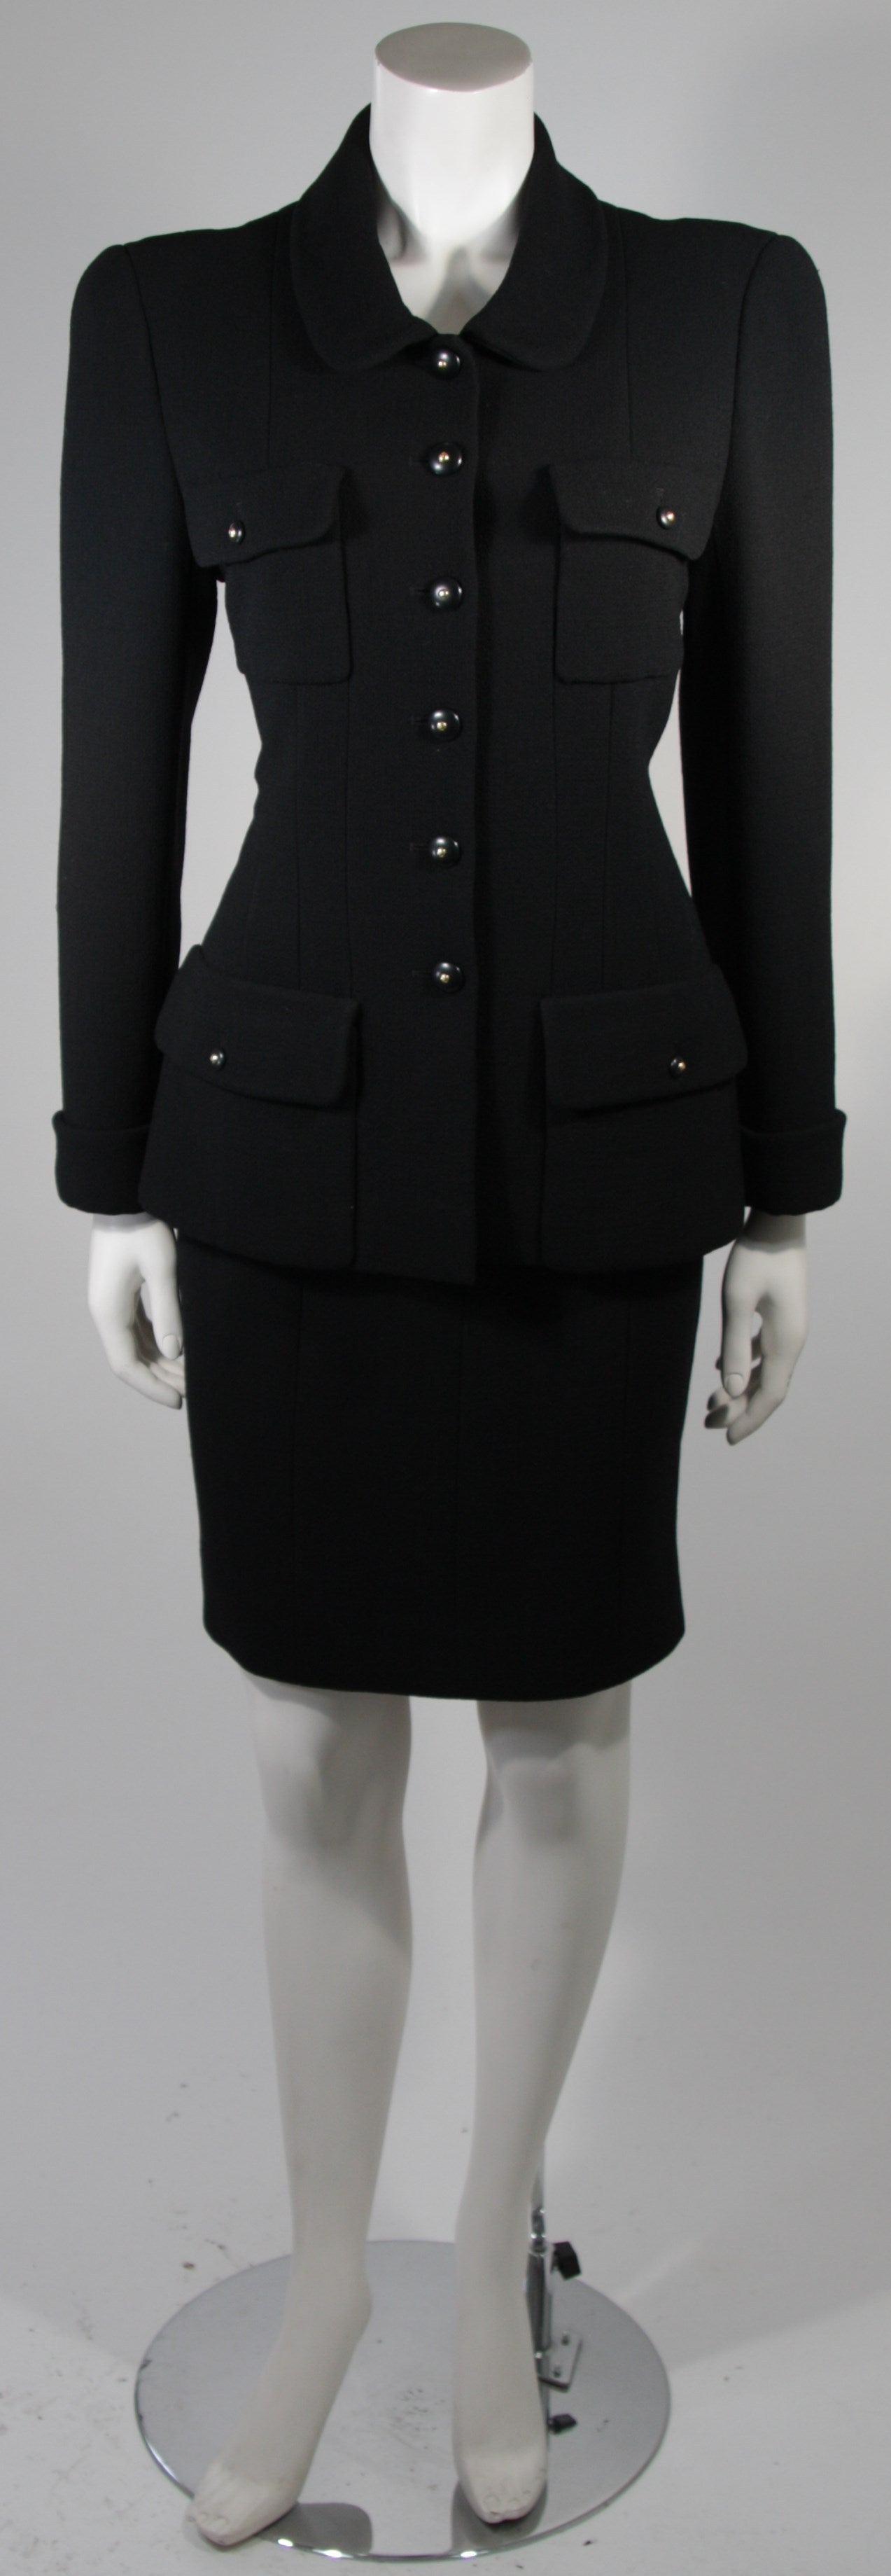 This Chanel skirt suit is available for viewing at our Beverly Hills Boutique. We offer a large selection of evening gowns and luxury garments.

This suit is composed of a black wool crepe. The jacket features four front pockets and a Peter Pan